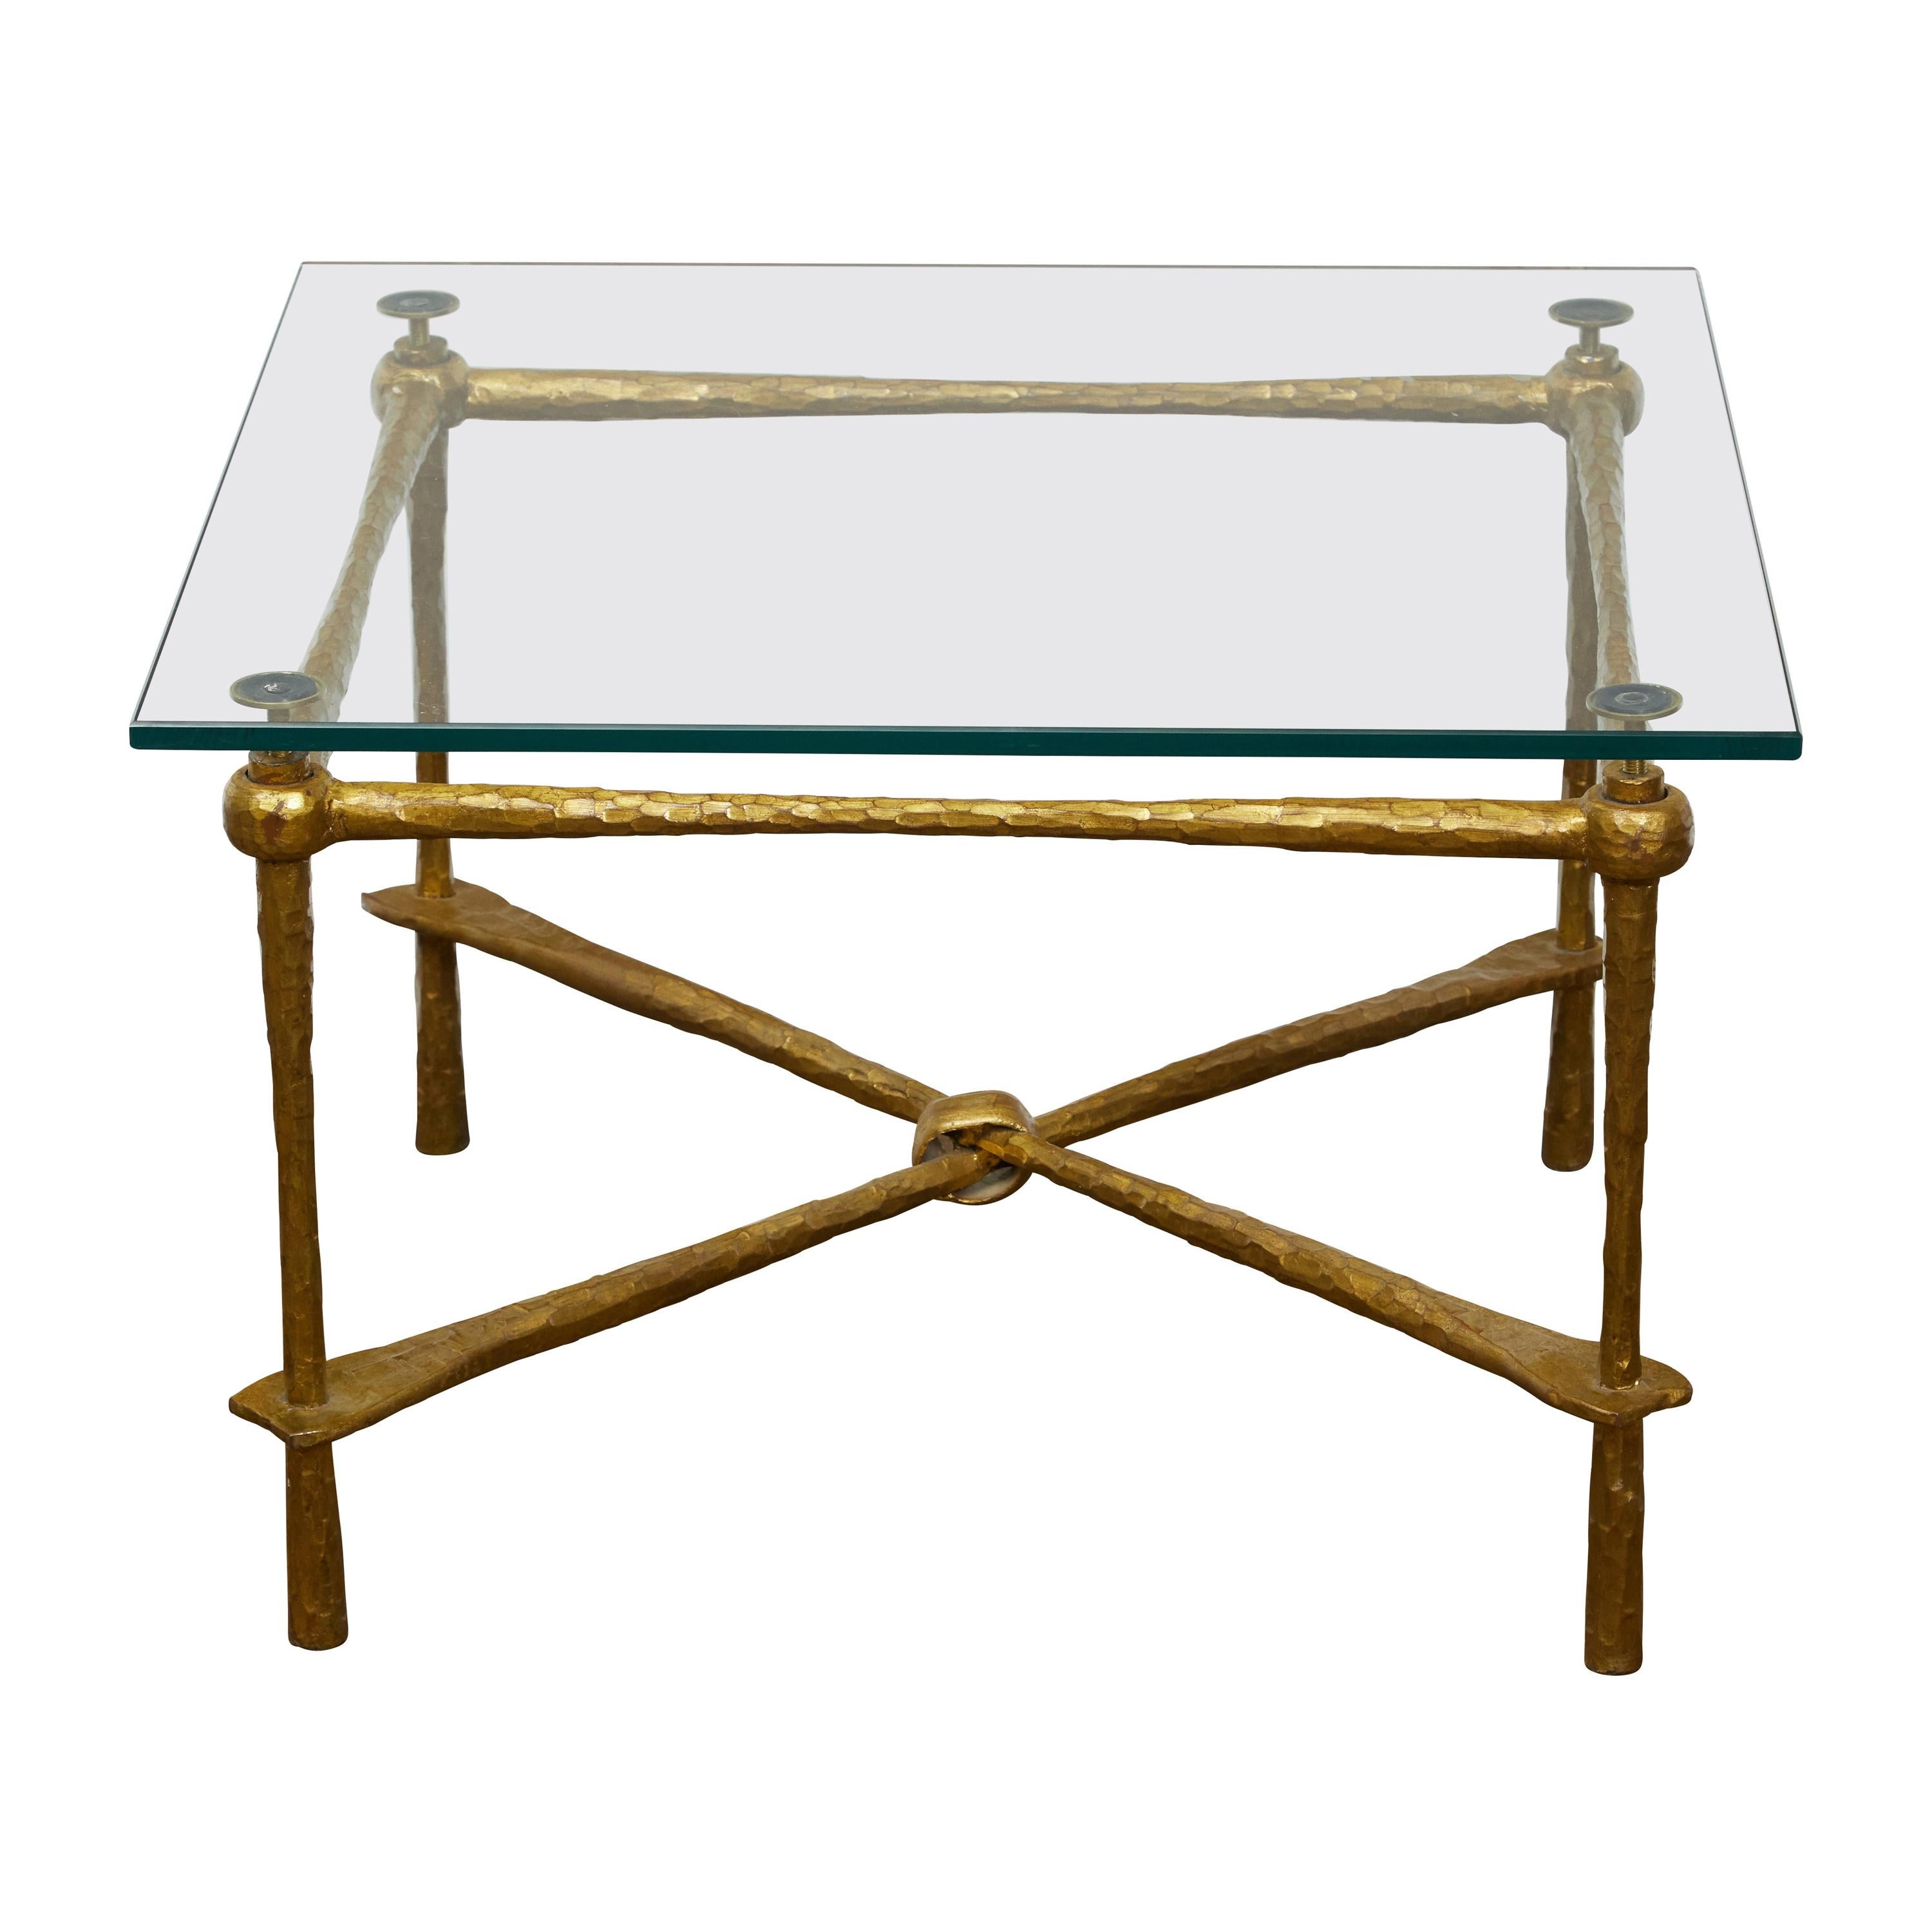 Italian Midcentury Gilt Metal Coffee Table with Glass Top and Hammered Accents For Sale